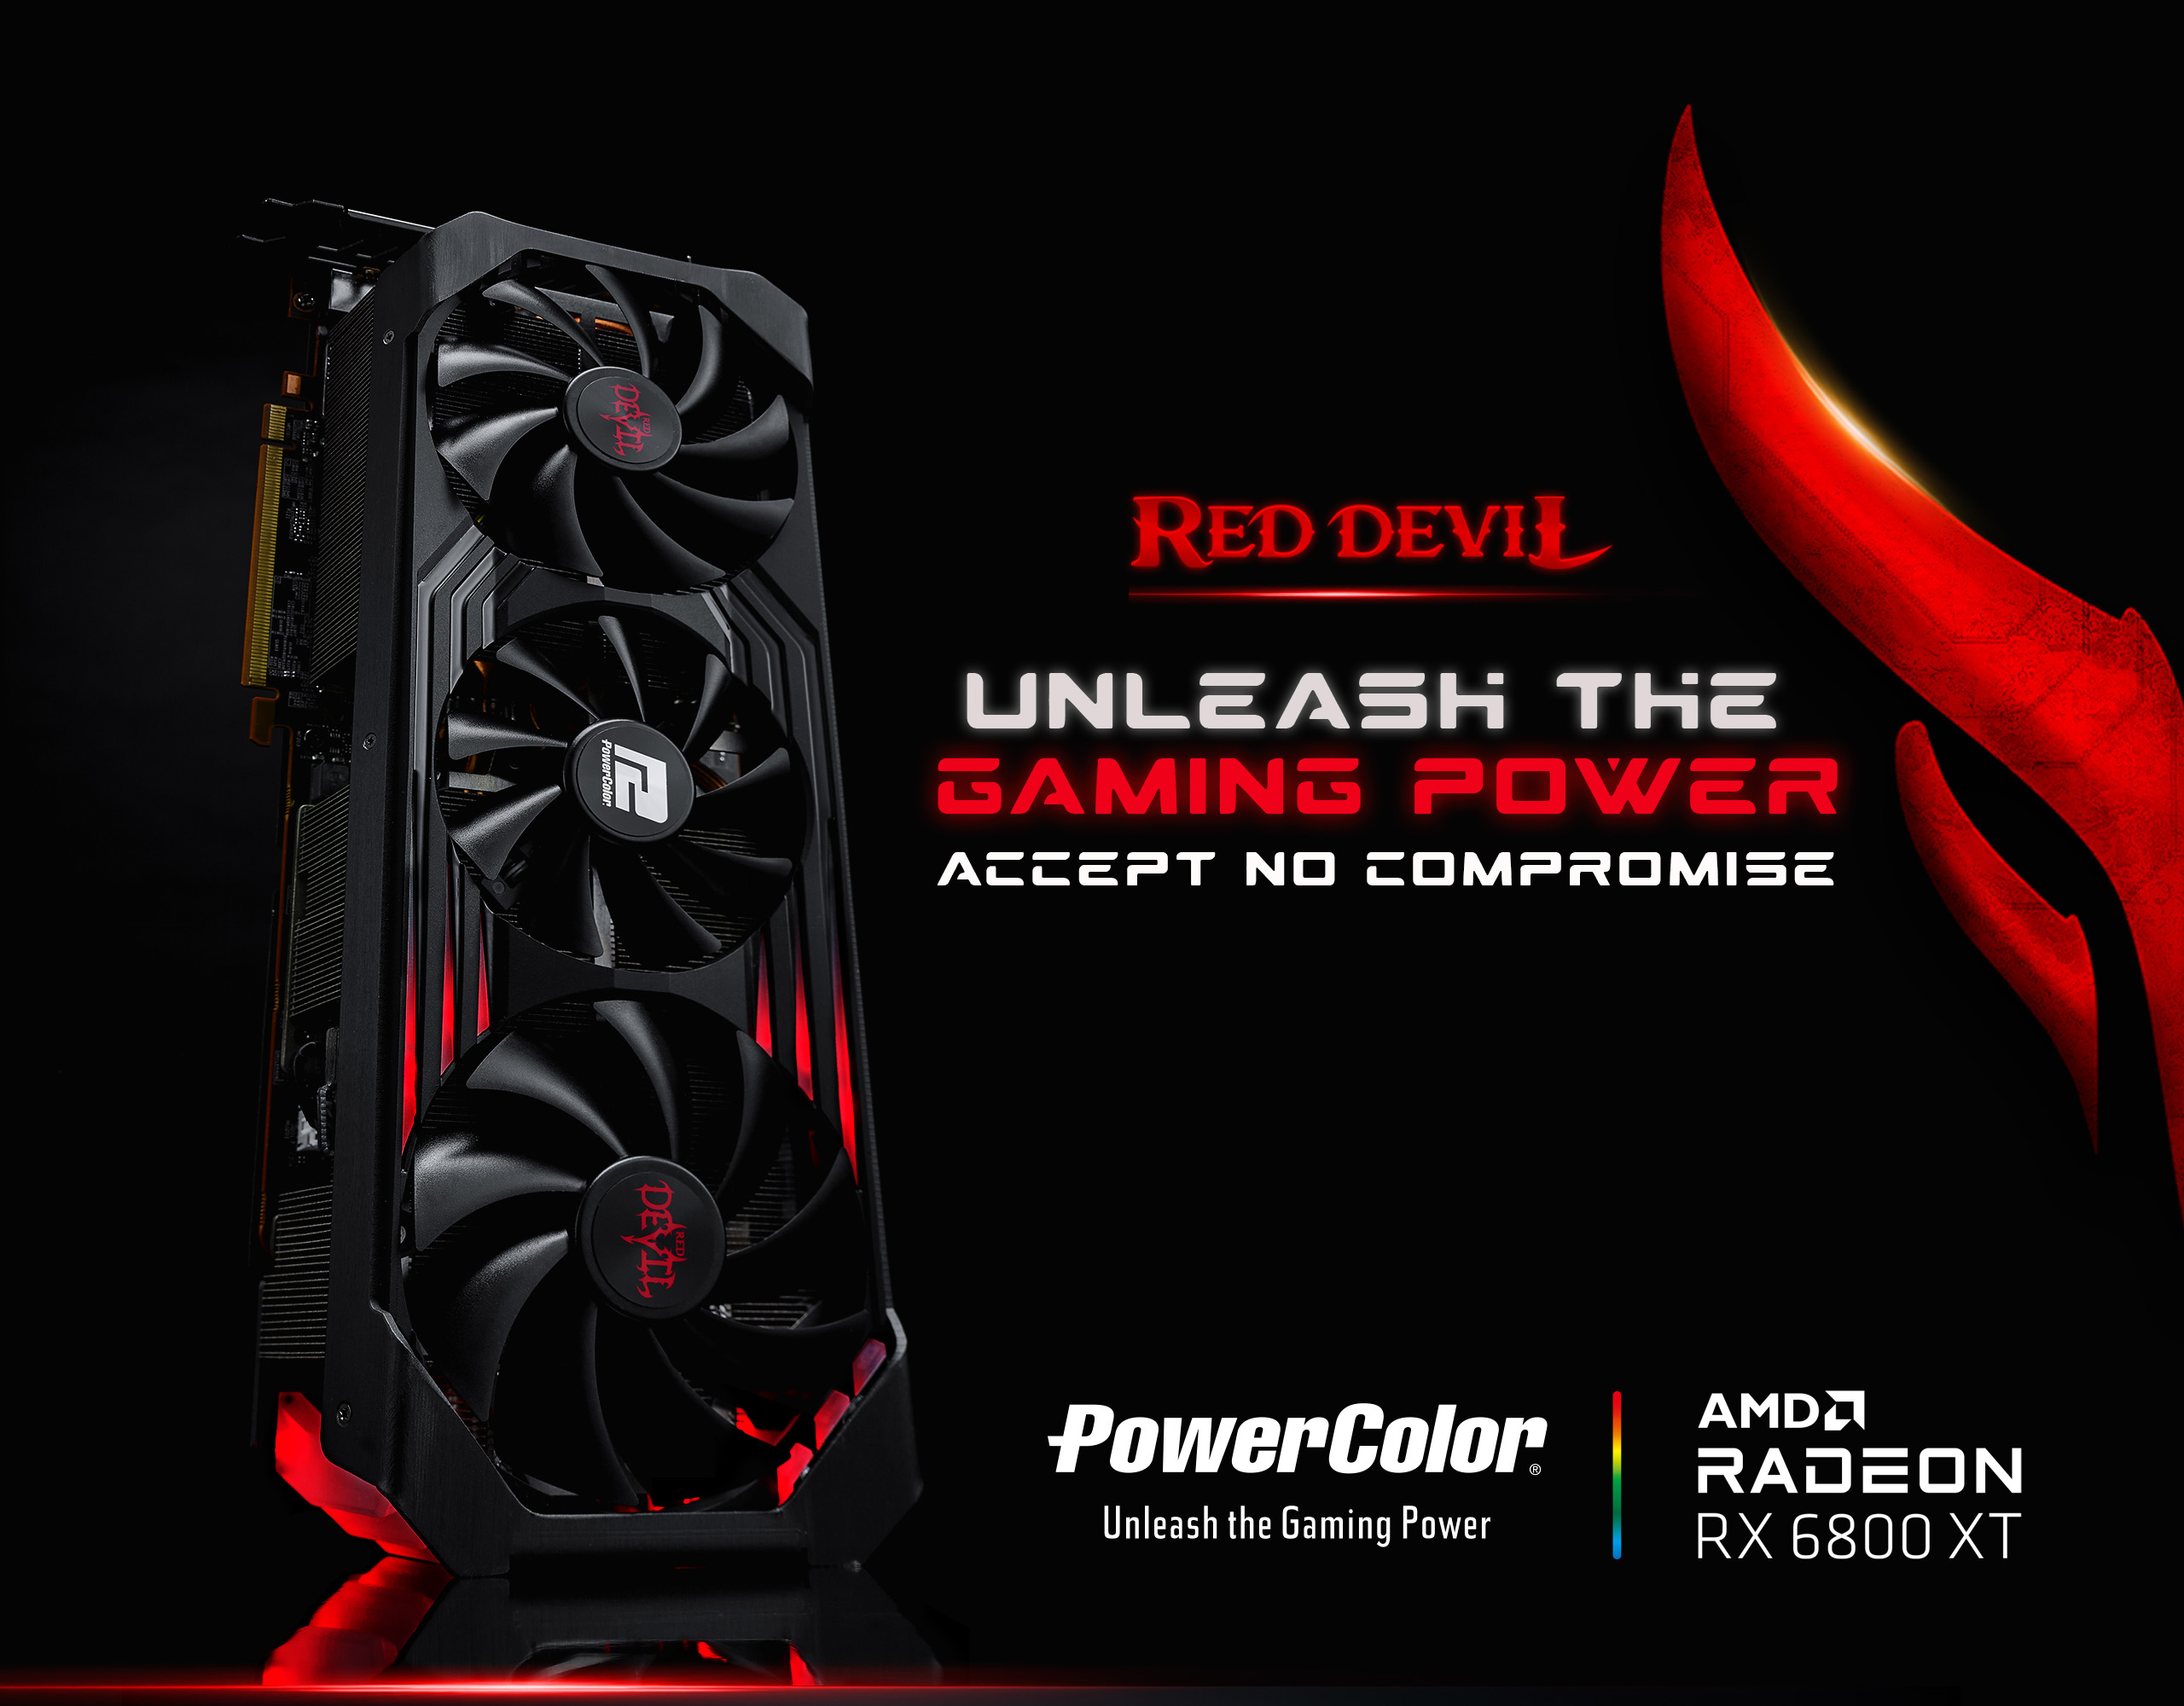 PowerColor launches Radeon RX 6800 XT Red Devil graphics card